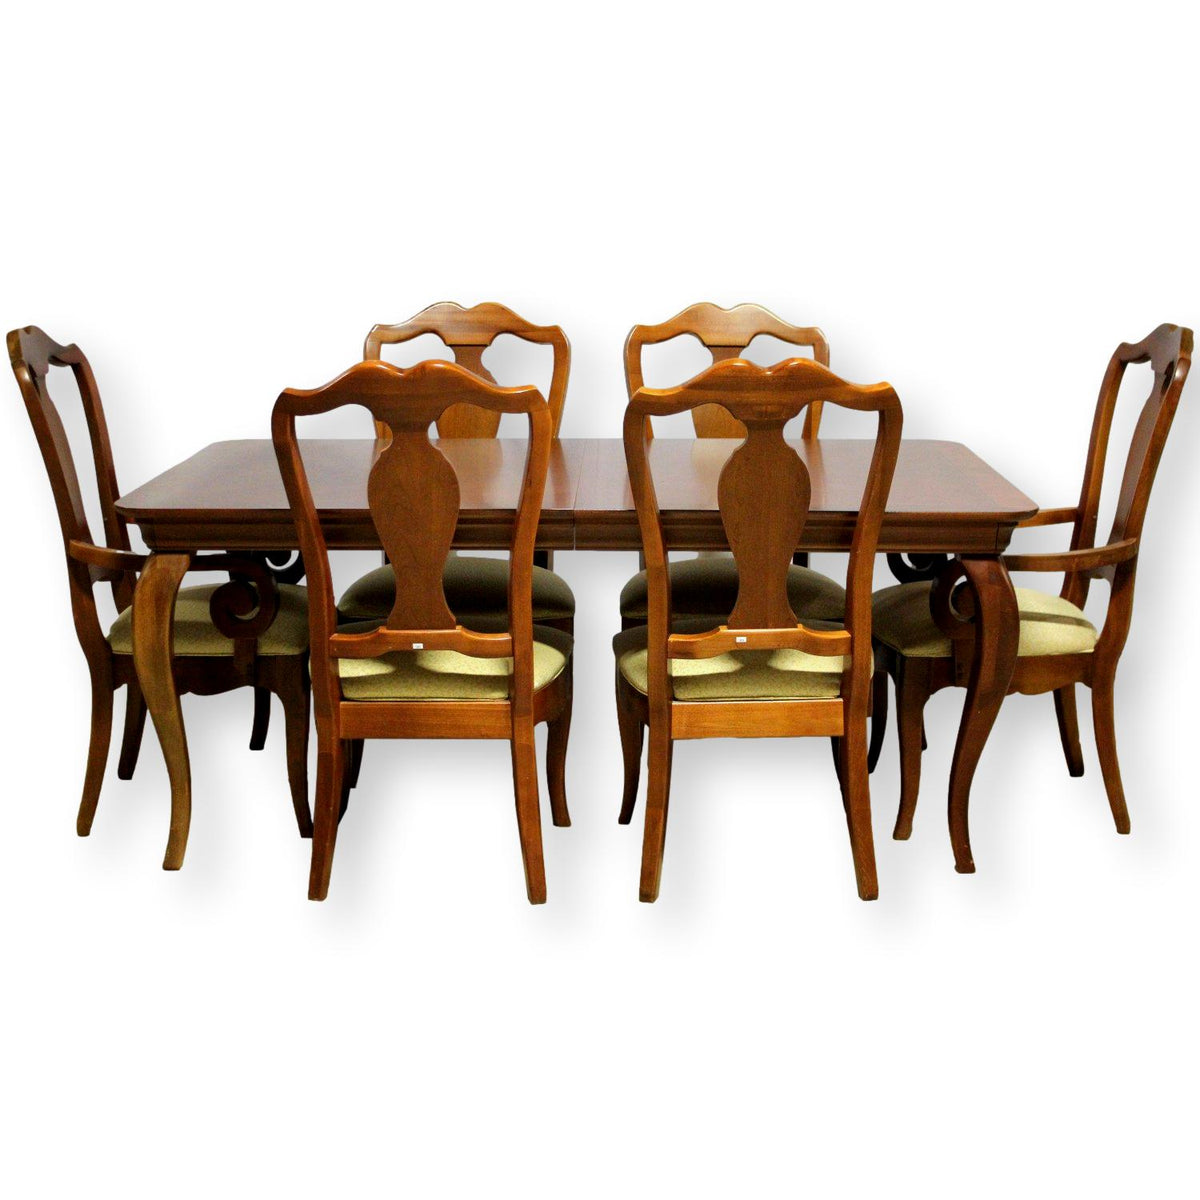 Thomasville Dining Table W 6 Chairs